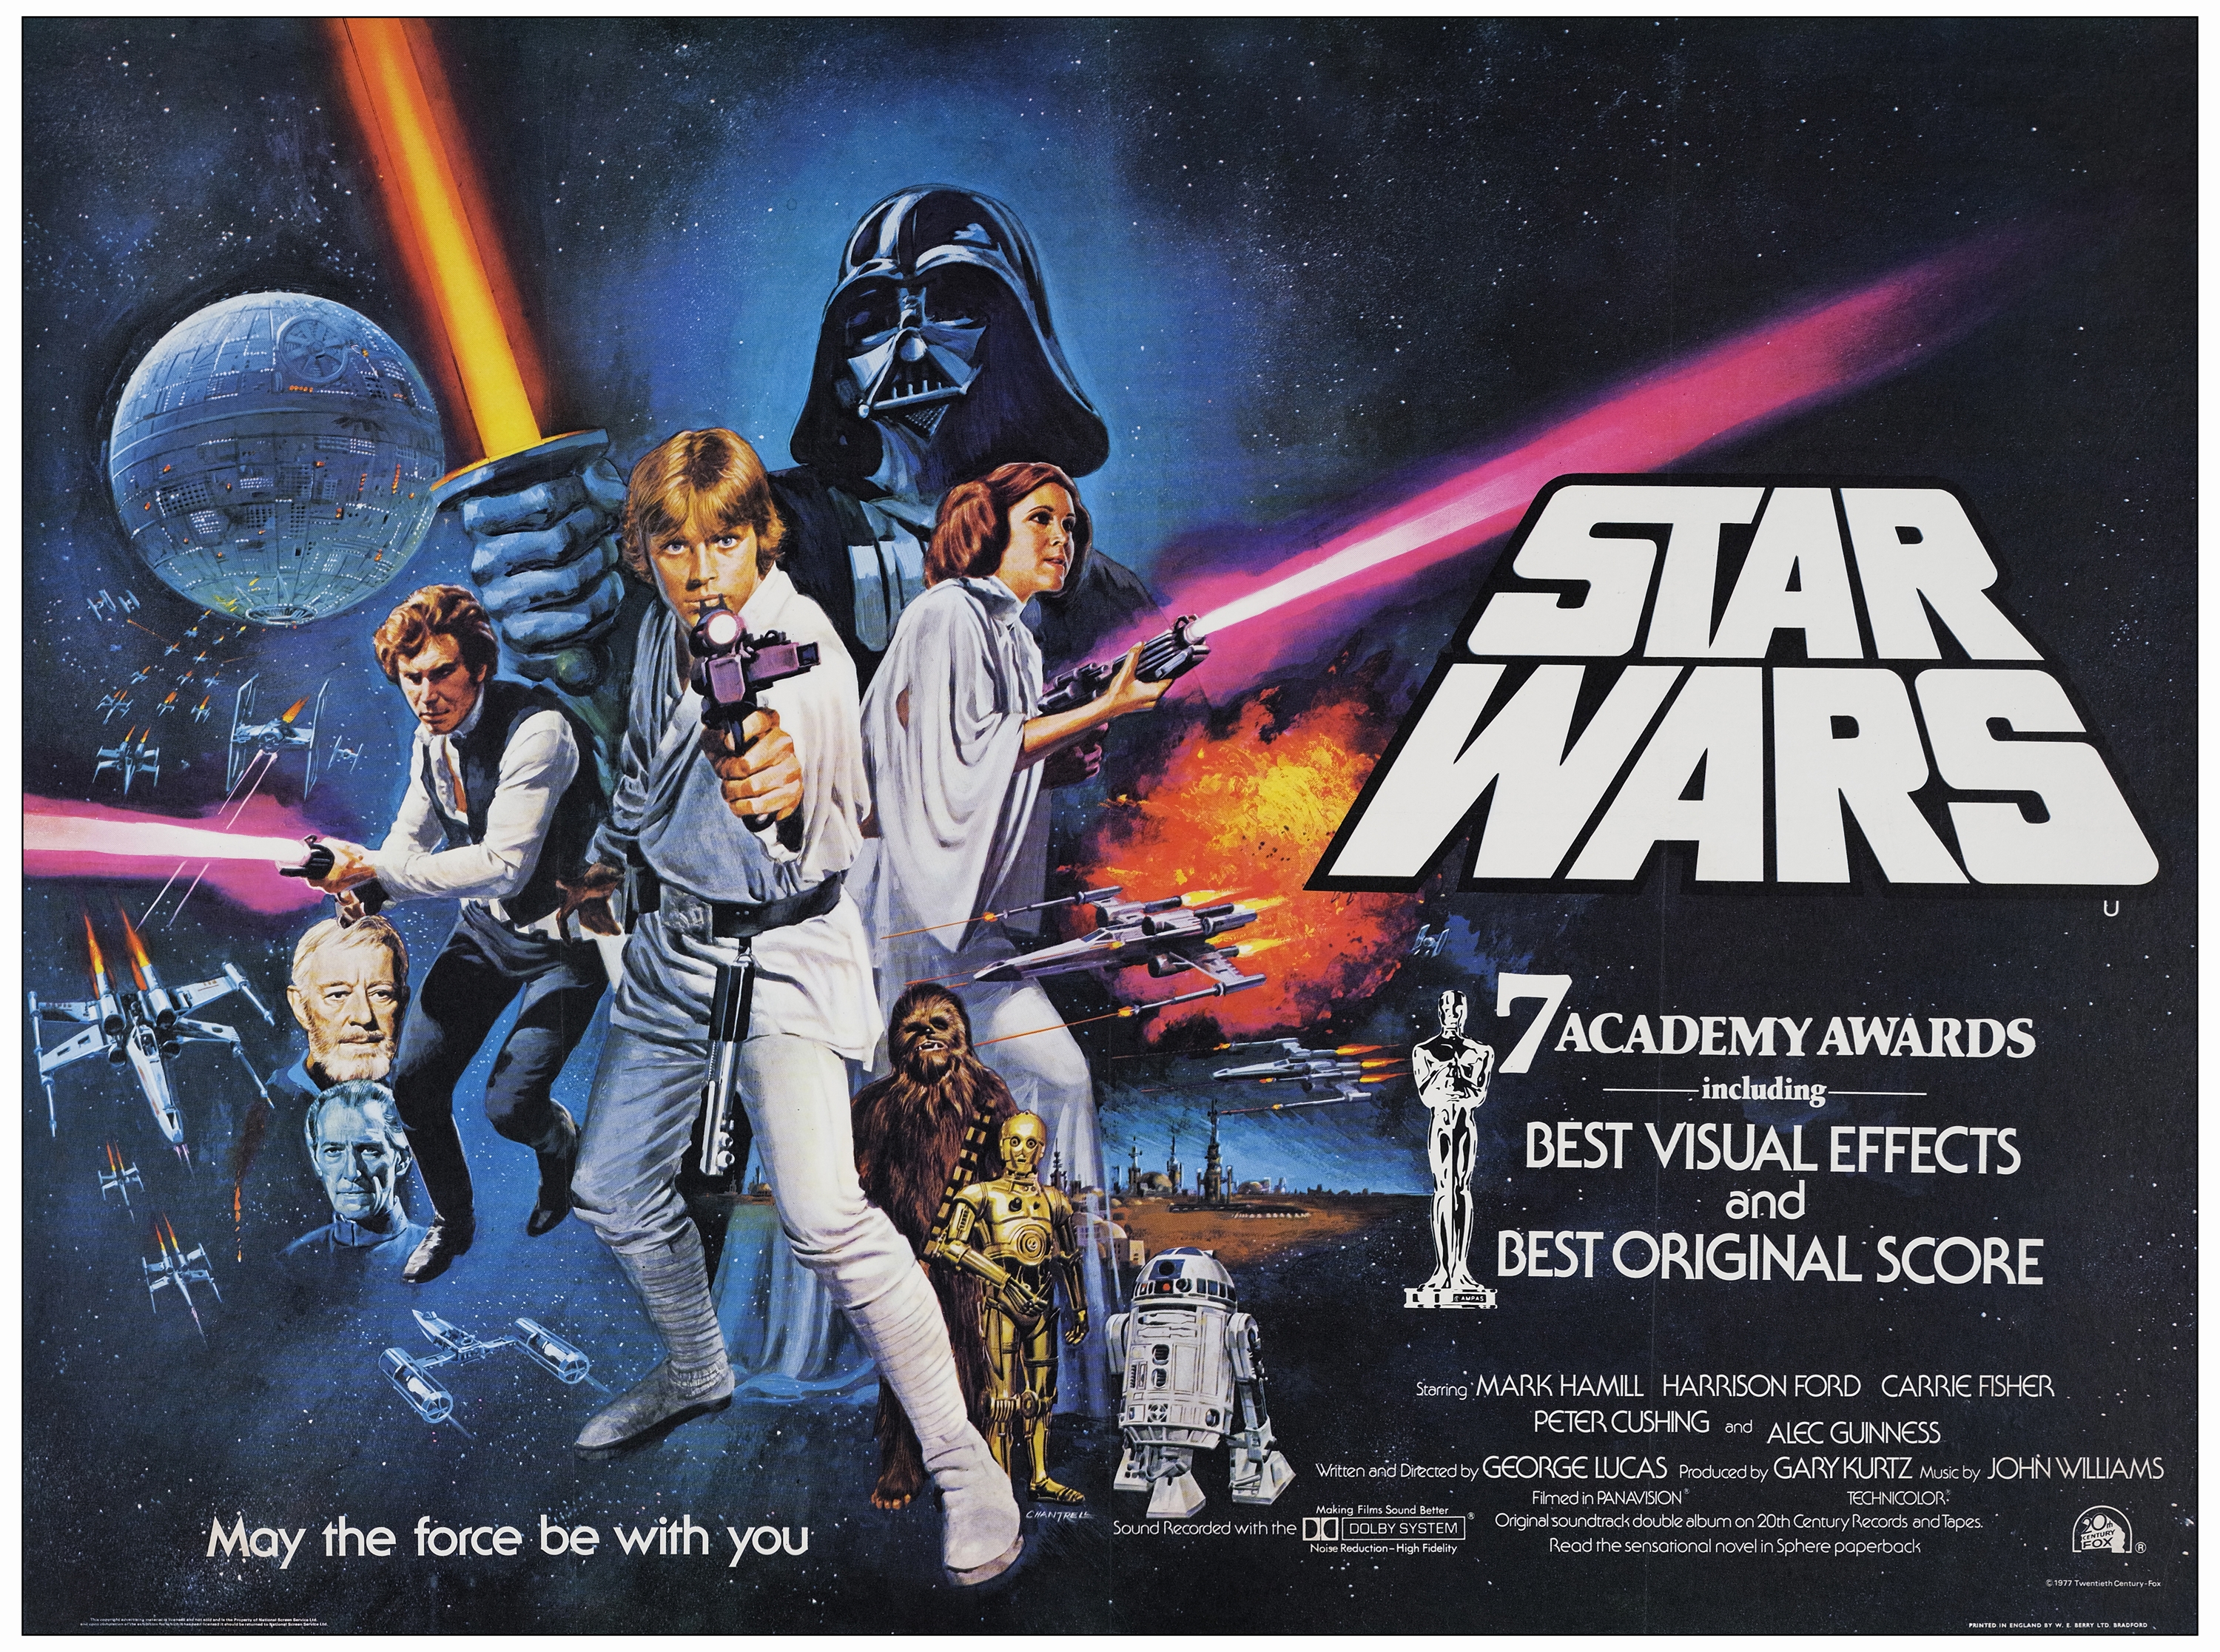 STAR WARS: A NEW HOPE - Full Bleed British Quad (30" x 40"); Academy Award Style, Style C; Very Fine